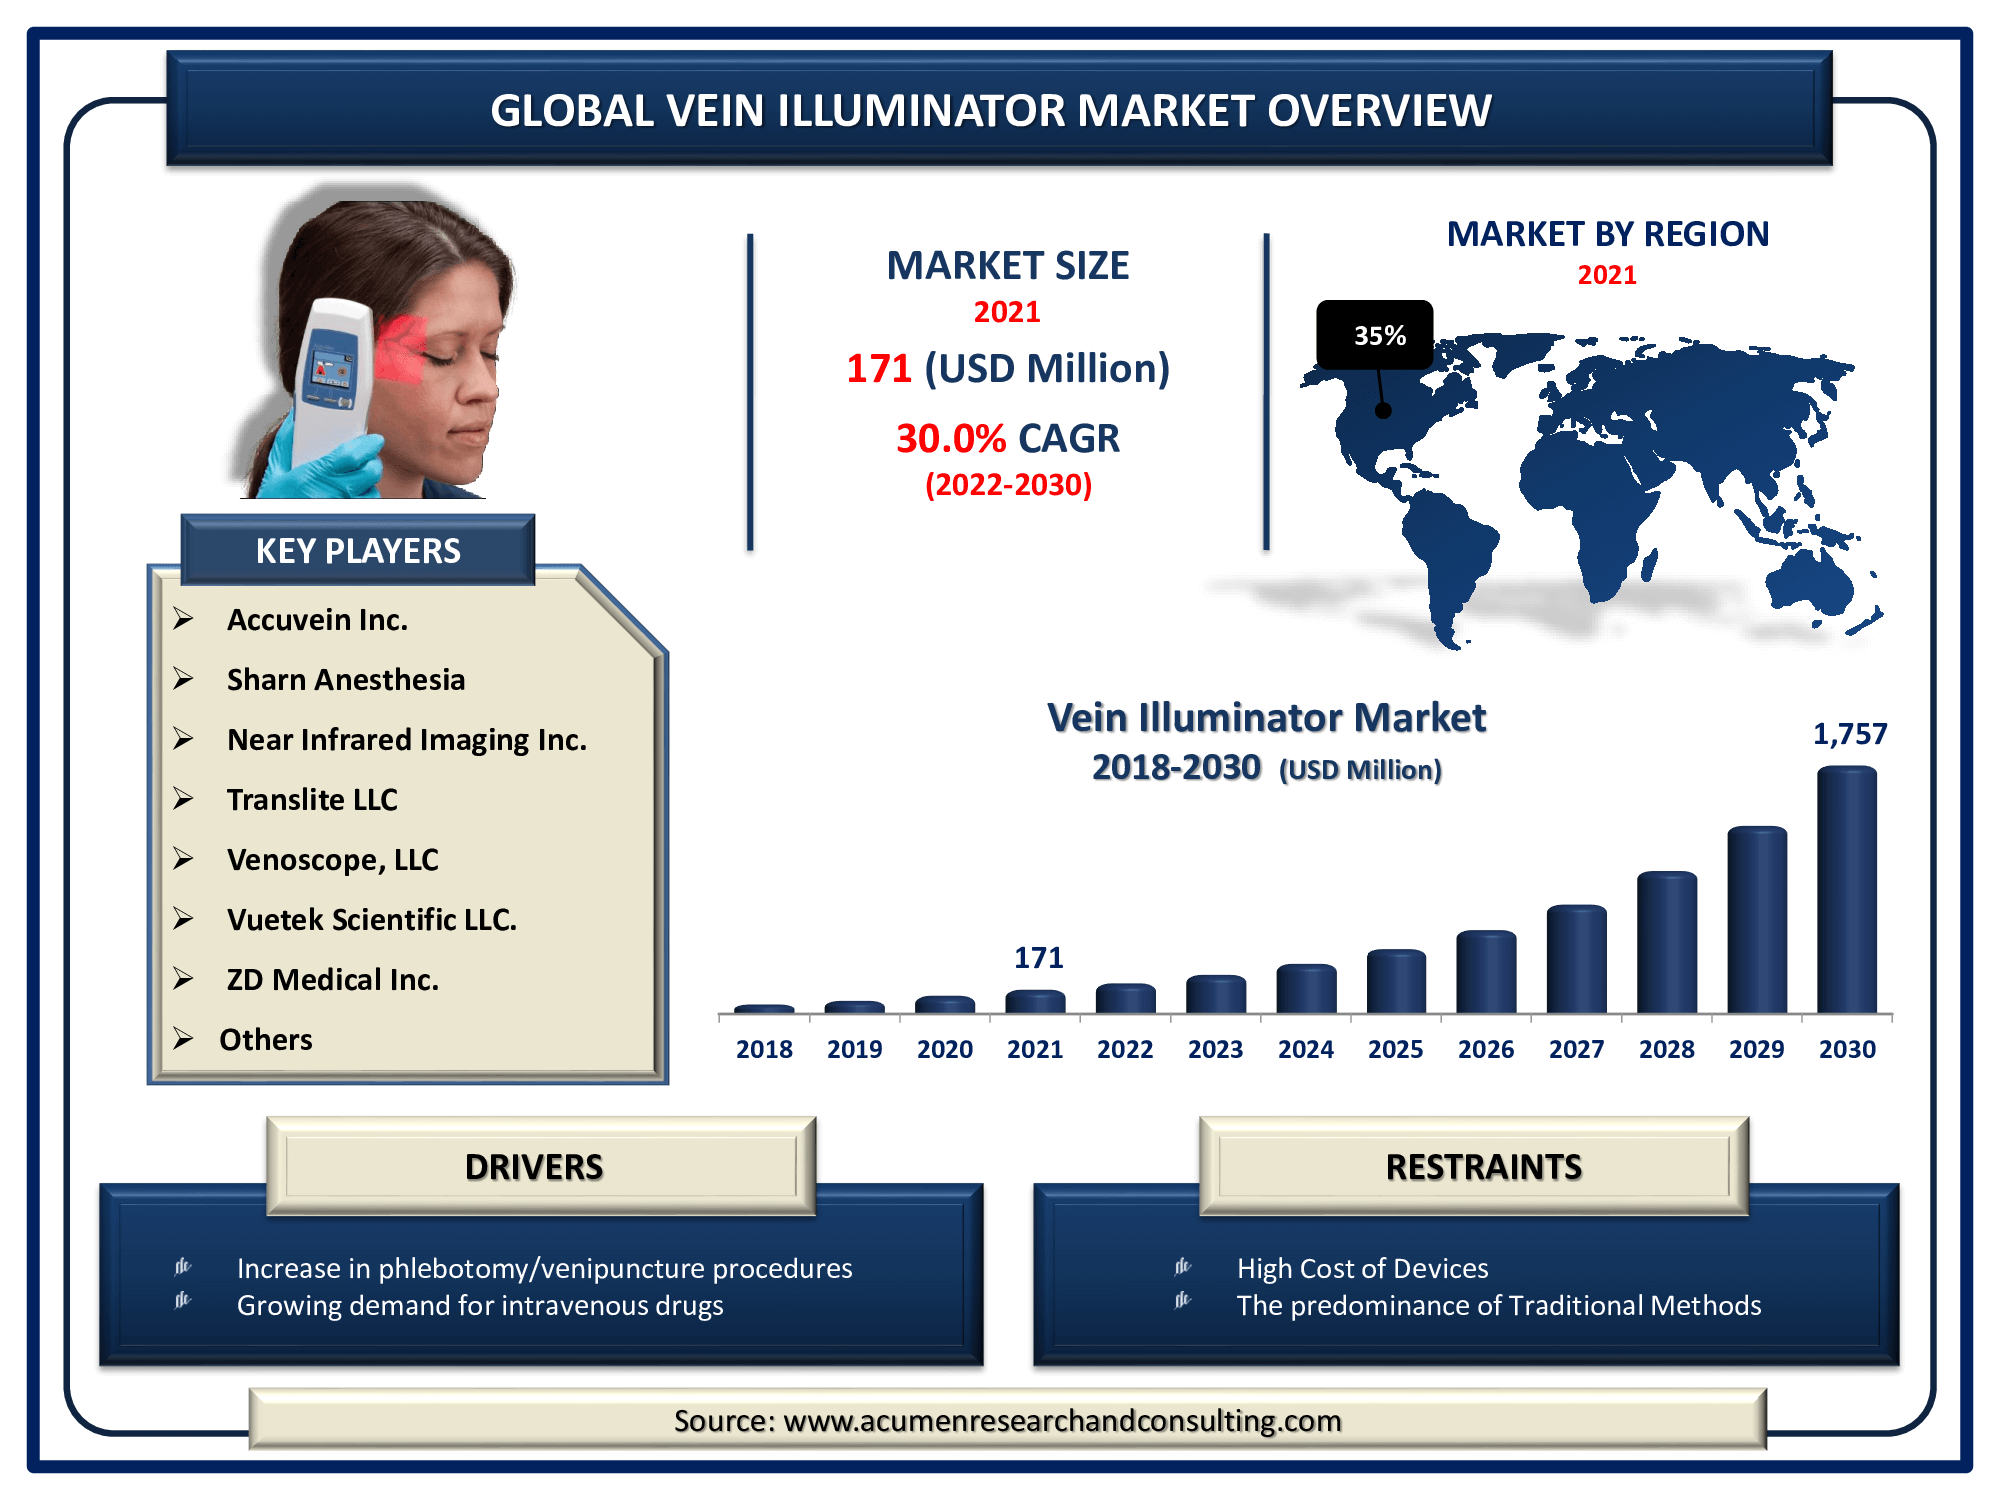 The Global Vein Illuminator Market Size accounted for USD 171 Million in 2021 and is estimated to achieve a market size of USD 1,757 Million by 2030 growing at a CAGR of 30.0% from 2022 to 2030. 